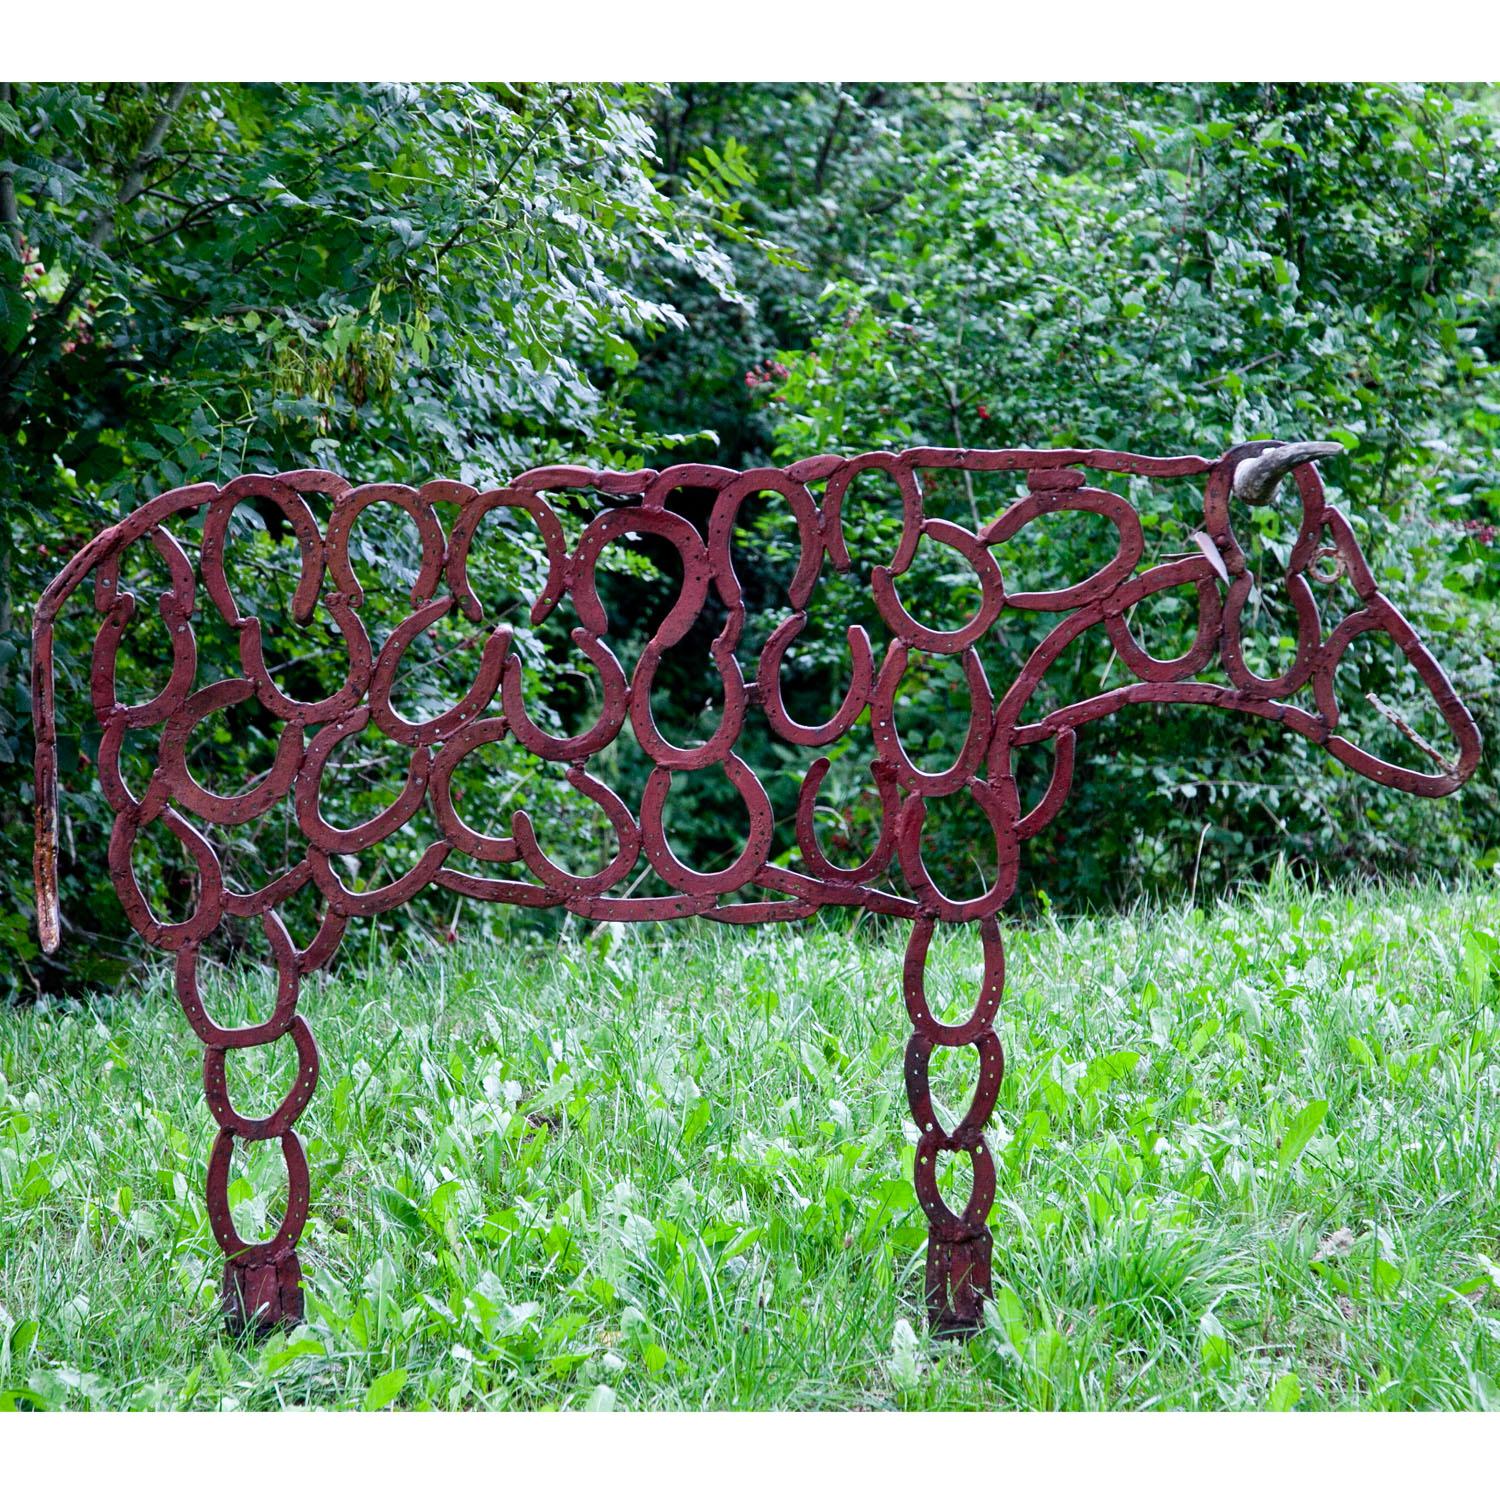 German Iron Sculpture of a Cow, 20th Century